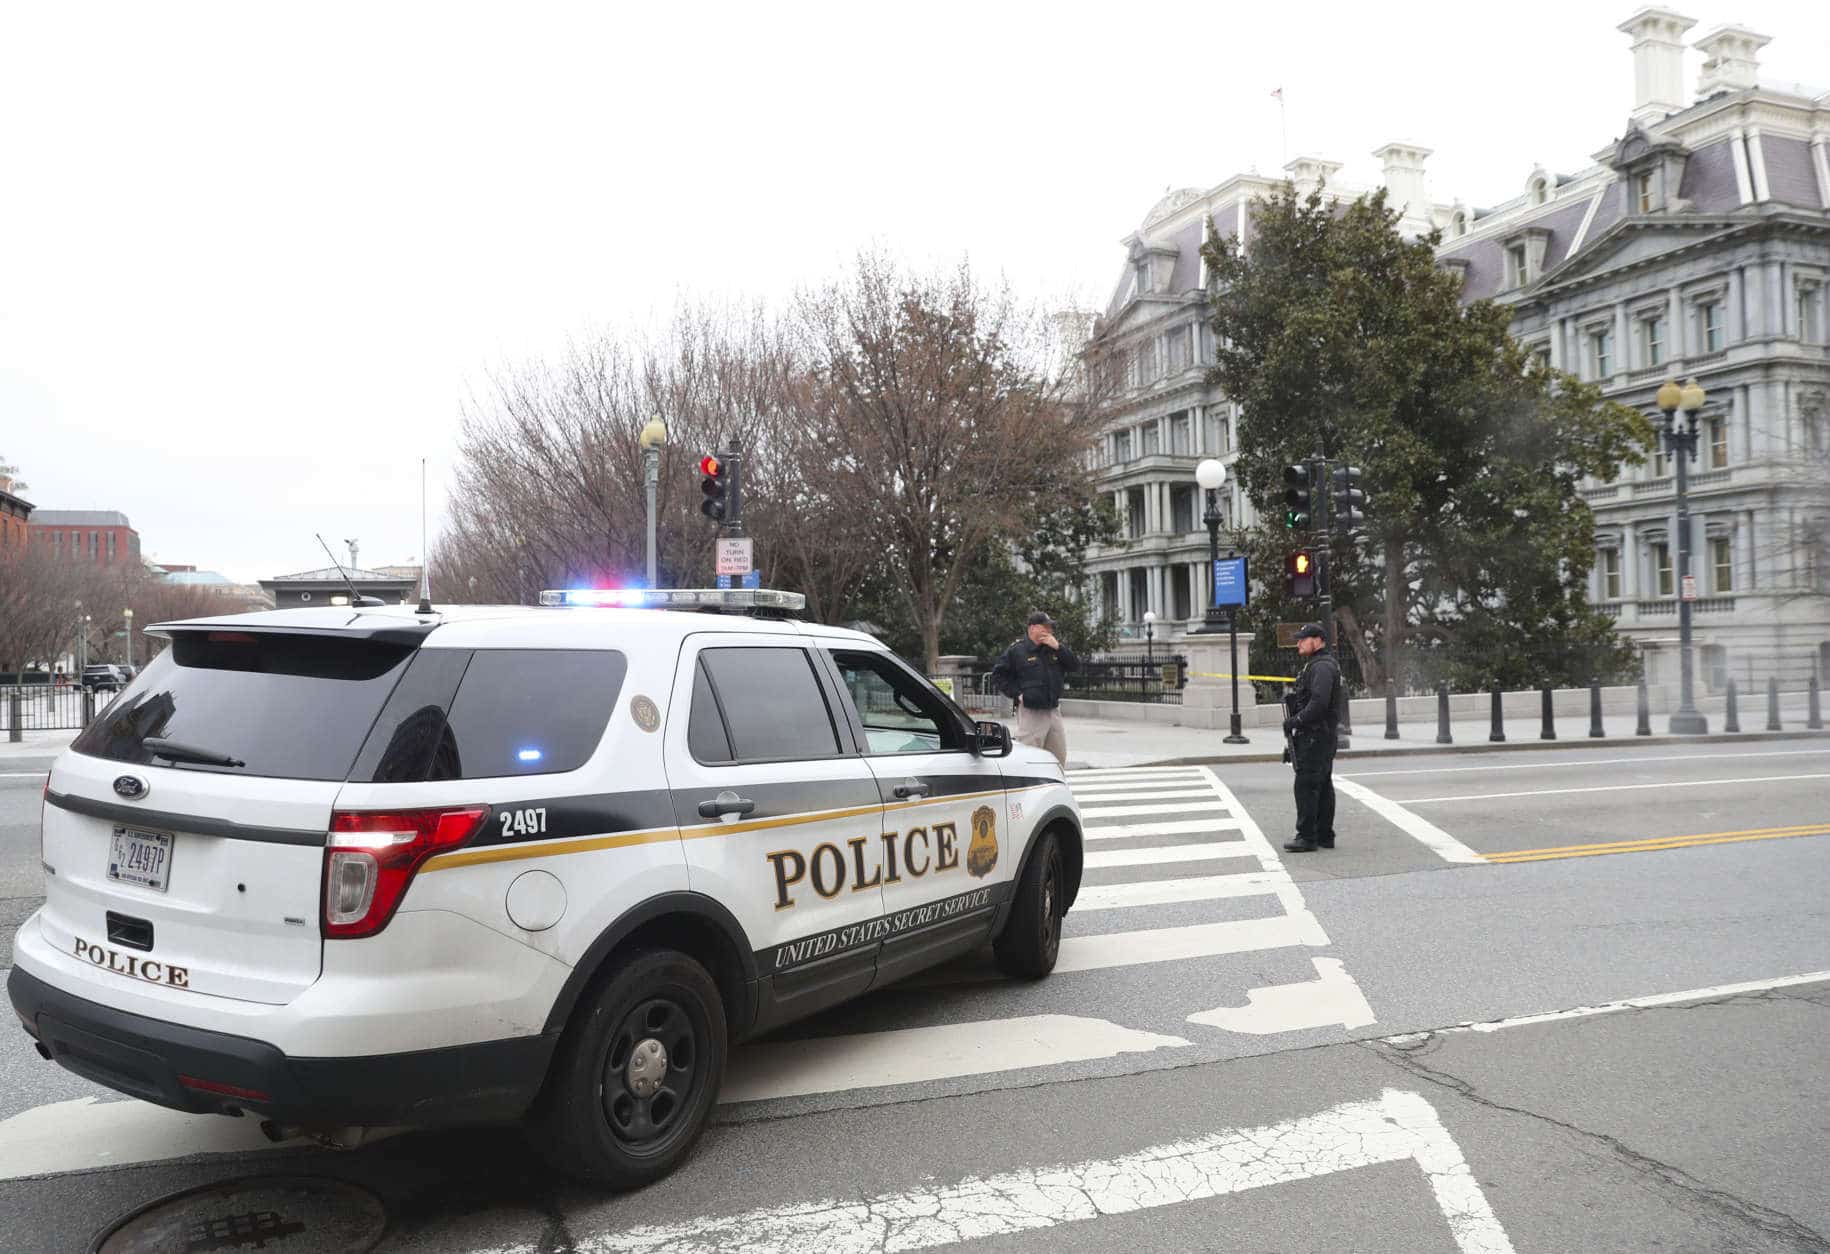 17th Street NW near the White House in Washington is closed as Secret Service officer after a vehicle rammed into a security barrier near the White House, Friday, Feb. 23, 2018, in Washington. (AP Photo/Pablo Martinez Monsivais)